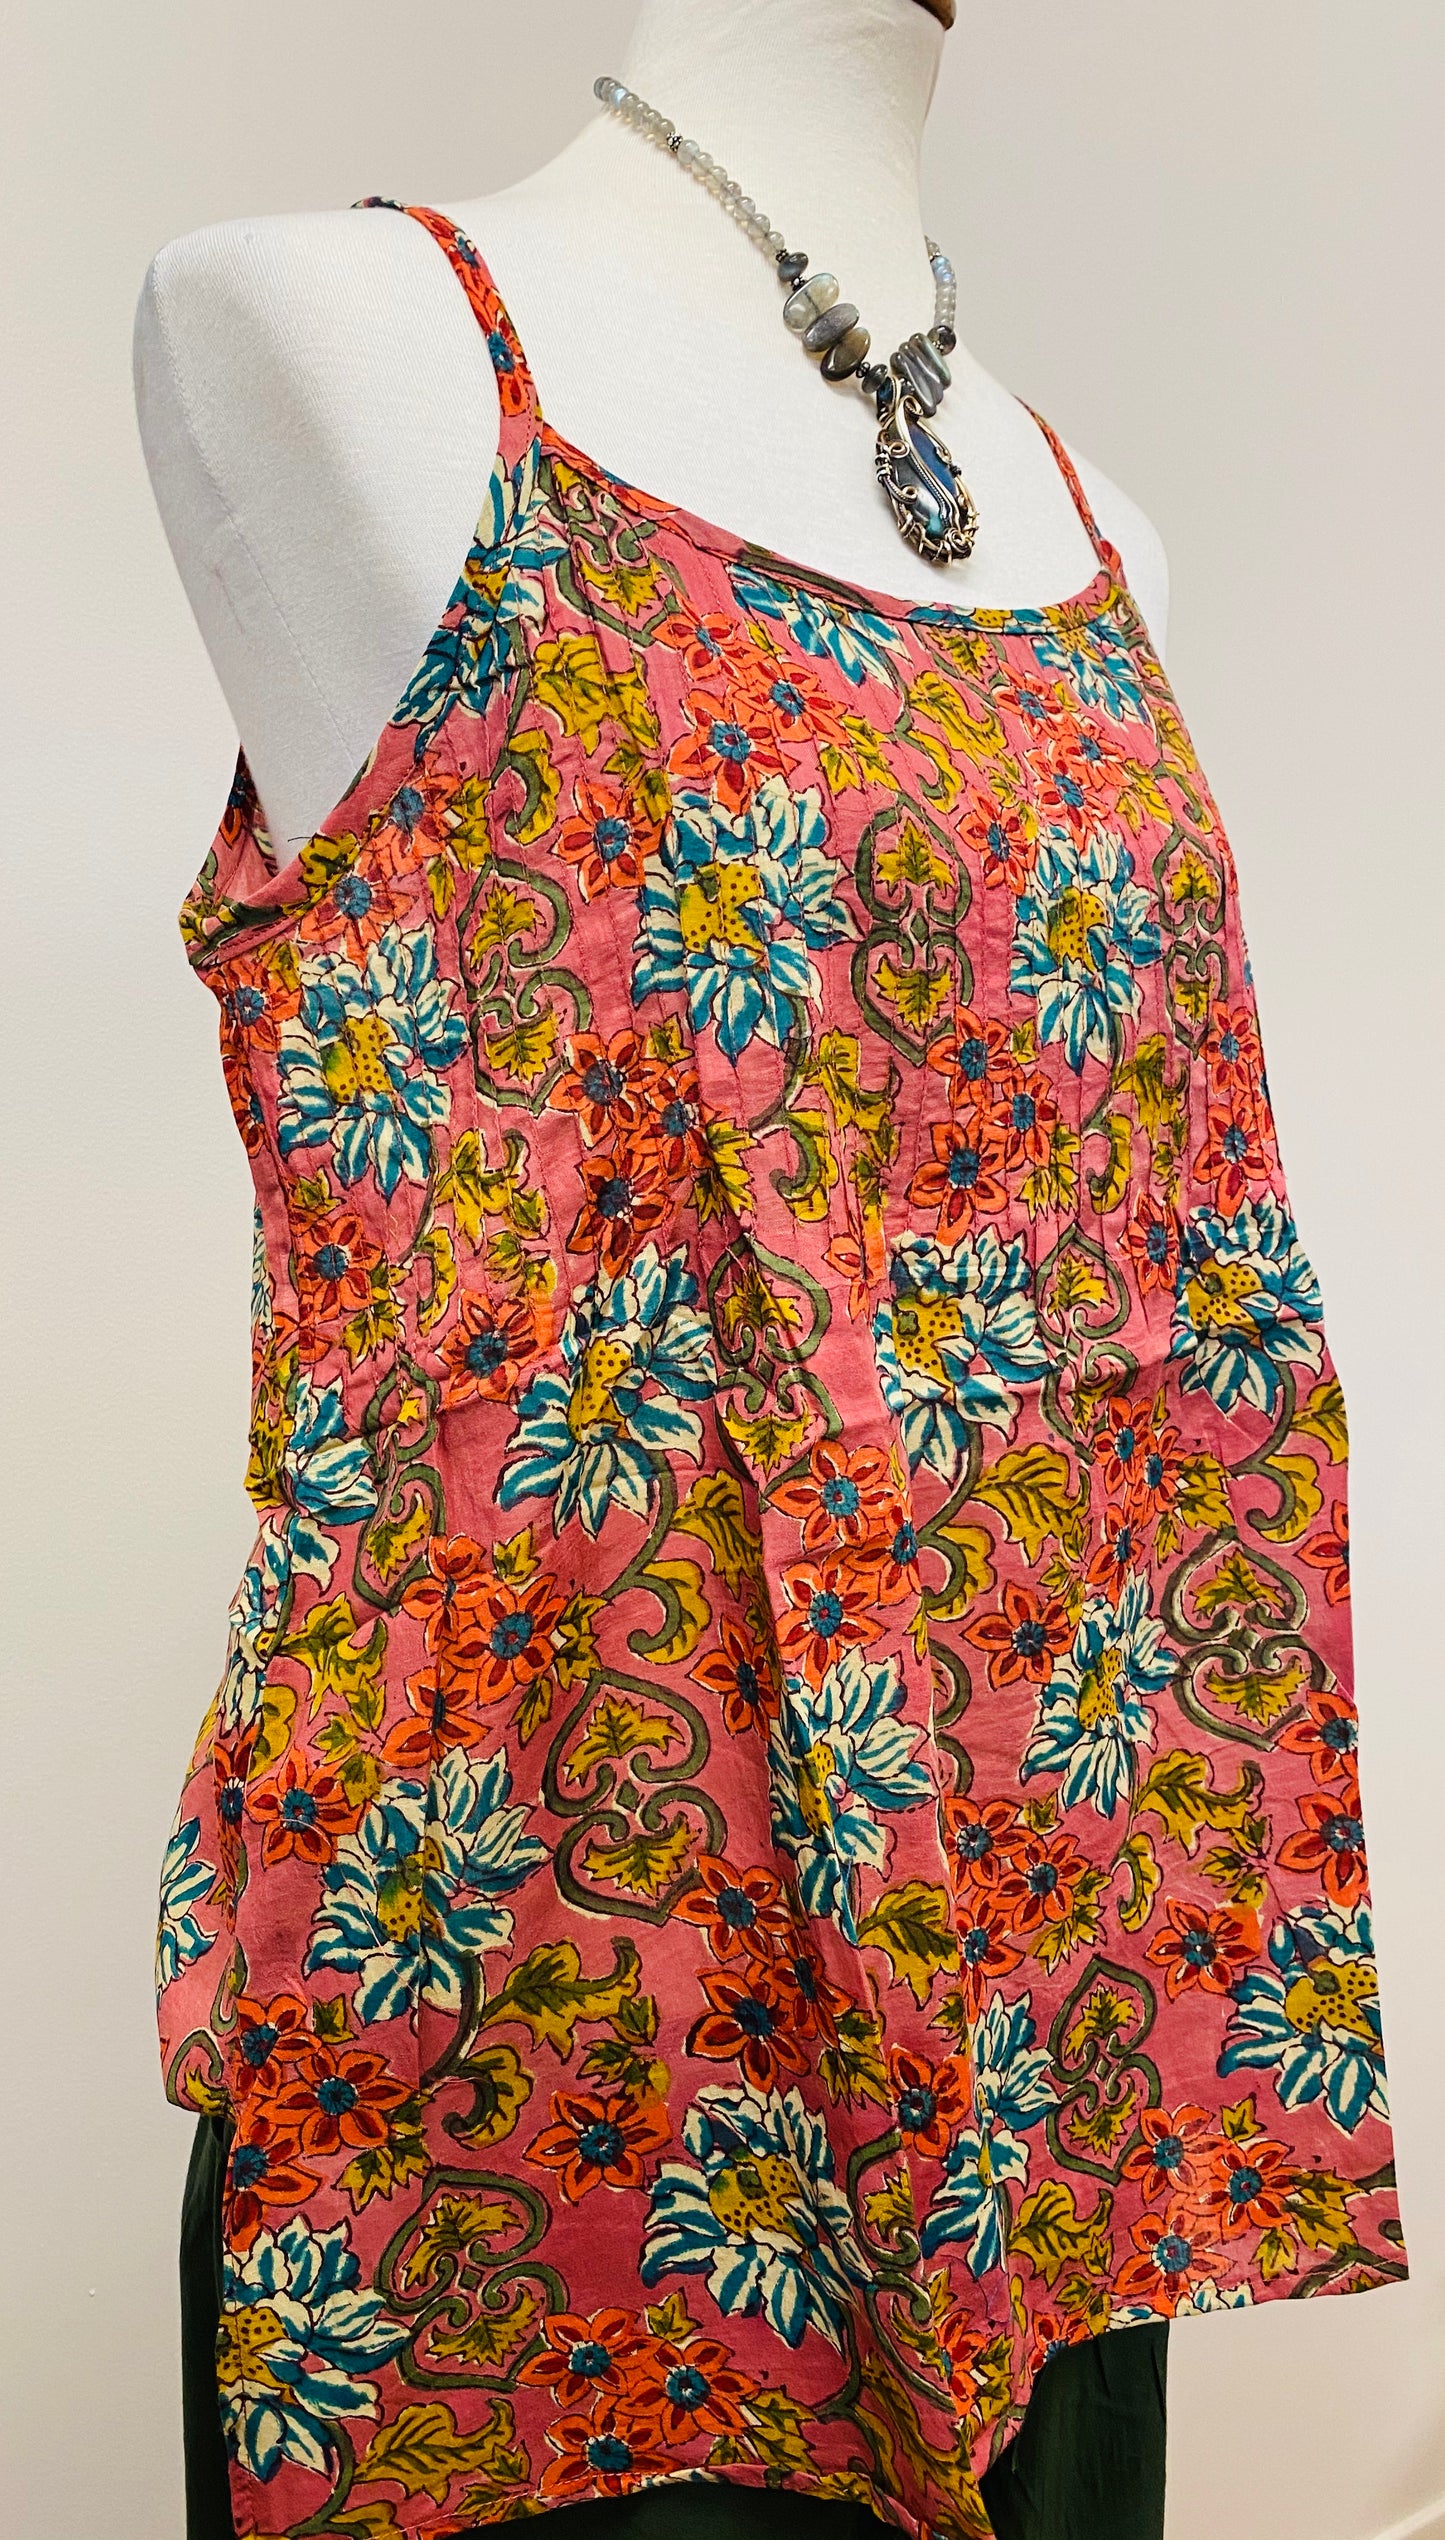 Hand Block Print Cotton Tank Top with Pockets! - 4 Patterns Available